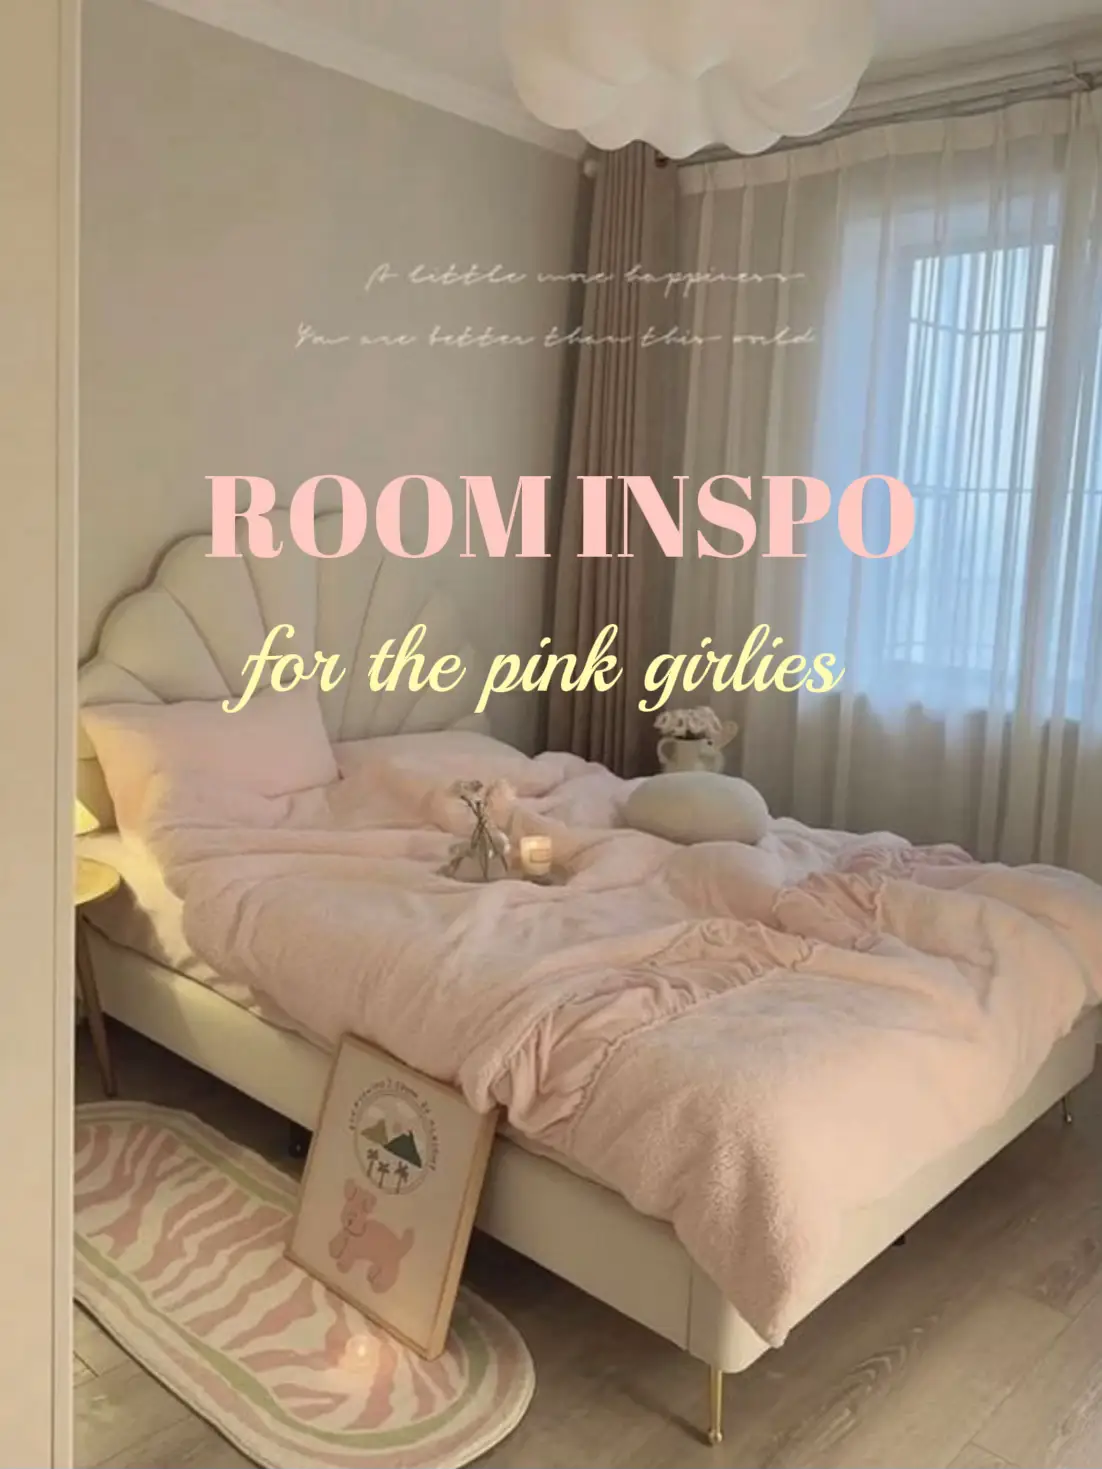 Coquette Bedroom Aesthetic: How To Recreate This Dreamy Decor Style